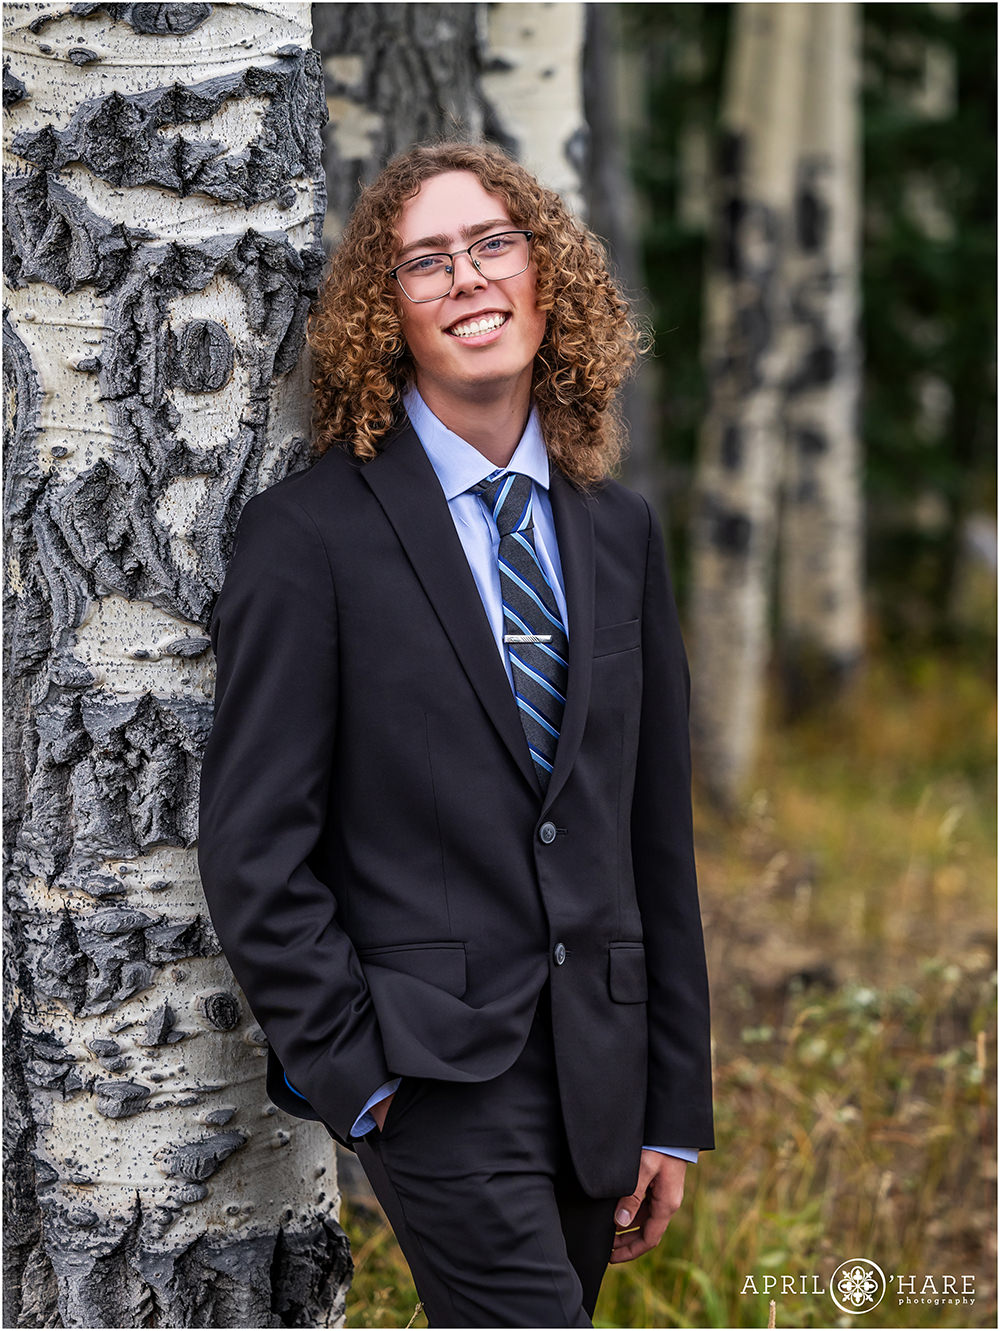 Senior boy with curly hair wearing glasses and a black suit leans against an aspen tree in Evergreen Colorado